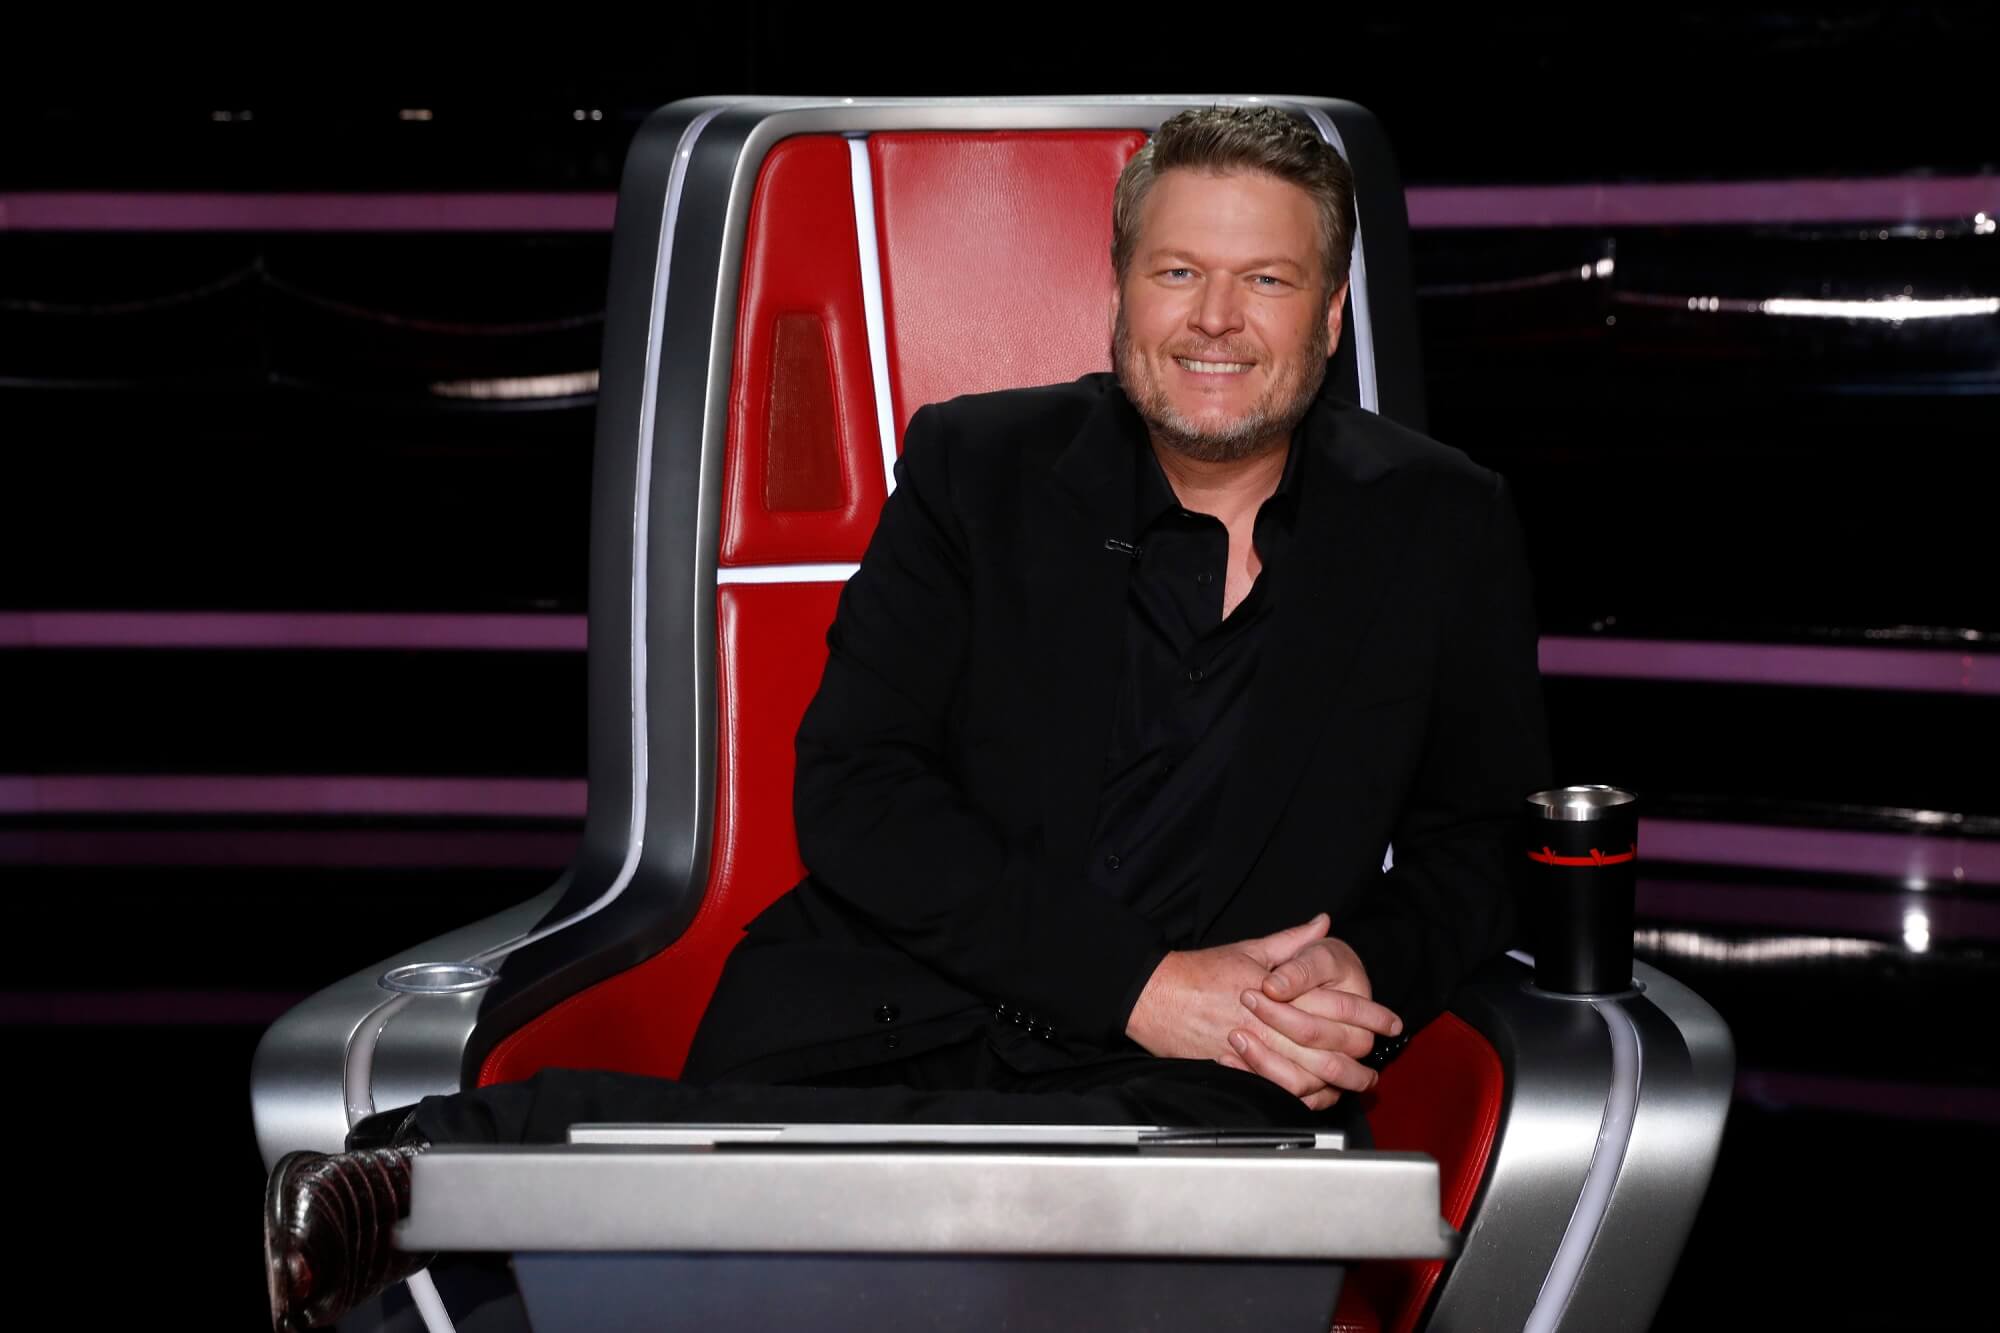 Blake Shelton smiles while sitting in a chair on 'The Voice'